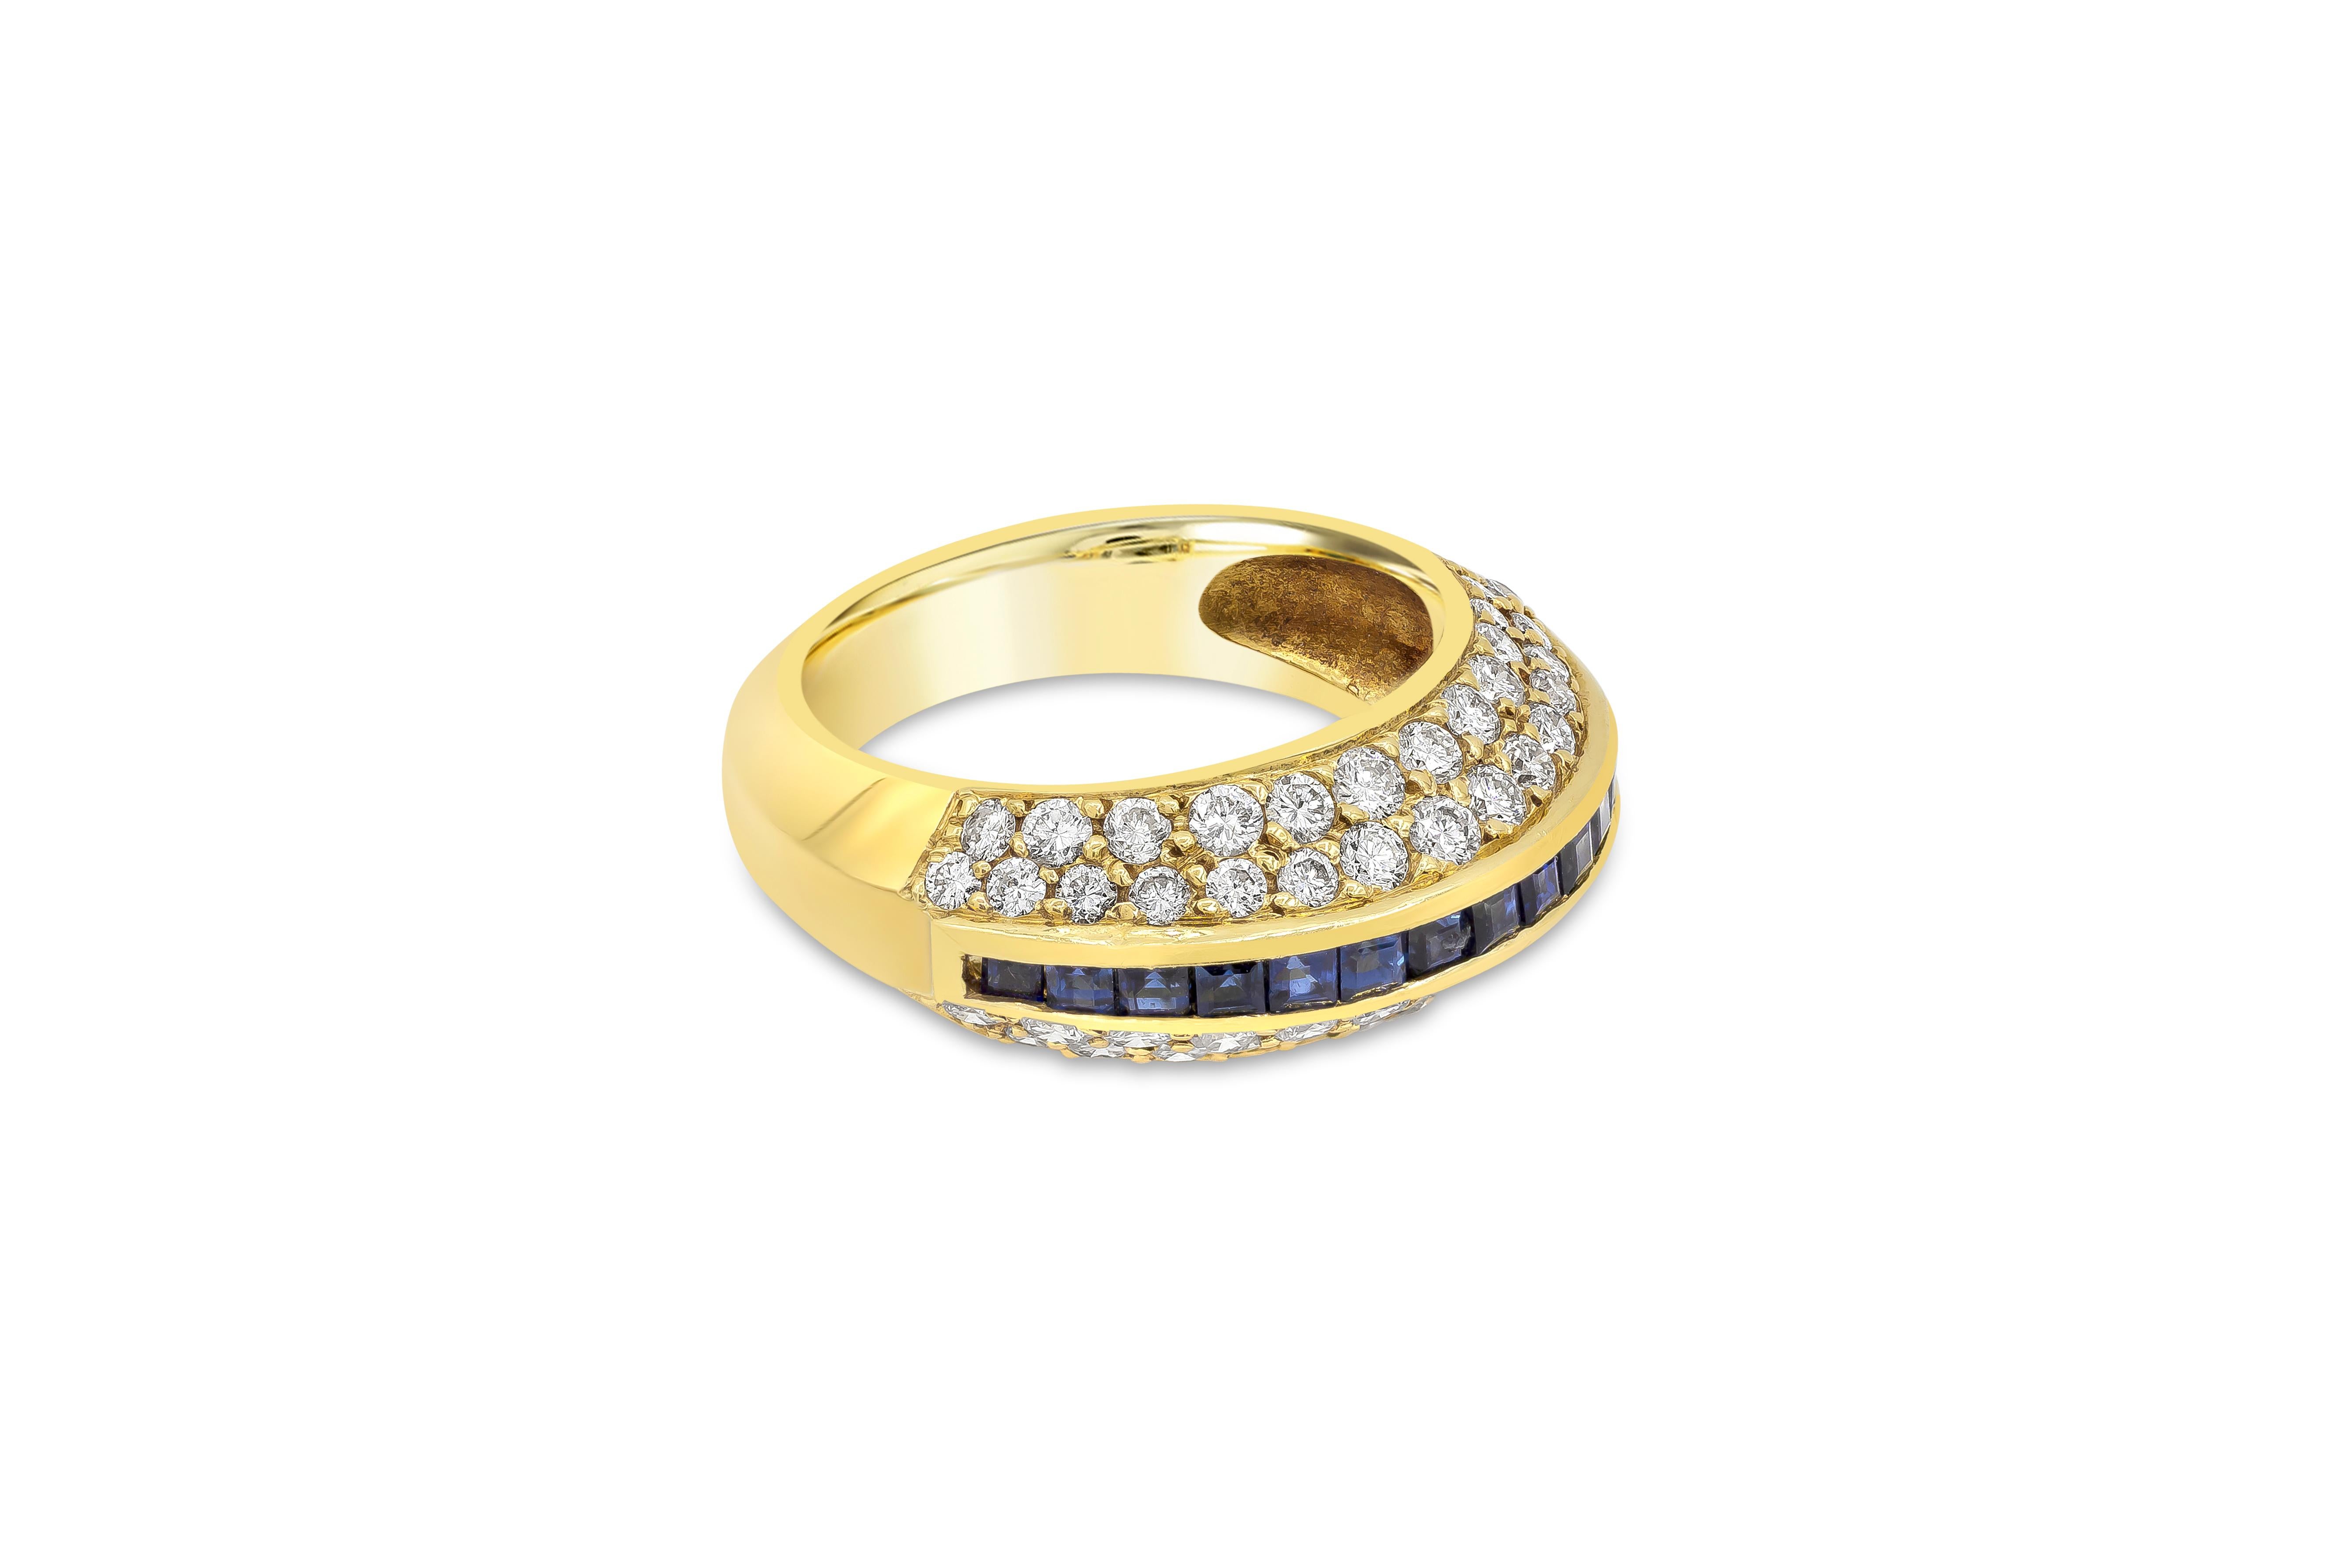 A unique and fashionable ring showcasing a row of square cut blue sapphires, set in a domed setting accented with round brilliant diamond weighing 2.01 carats total. Made in 18K Yellow Gold. Size 6.5 US resizable upon request and 9mm in